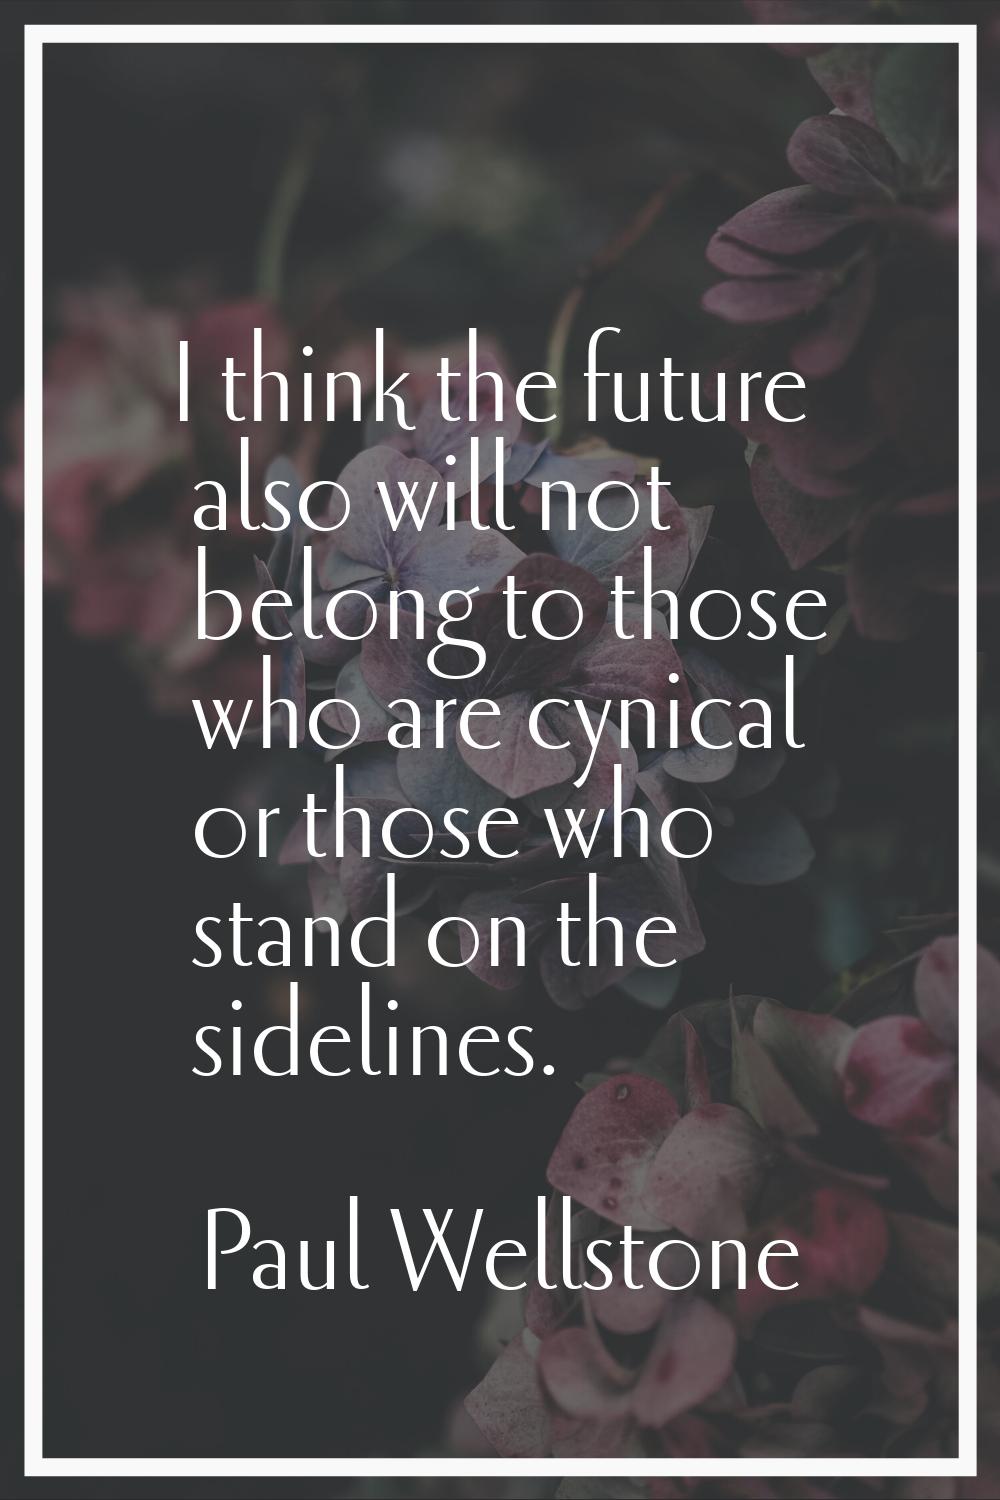 I think the future also will not belong to those who are cynical or those who stand on the sideline